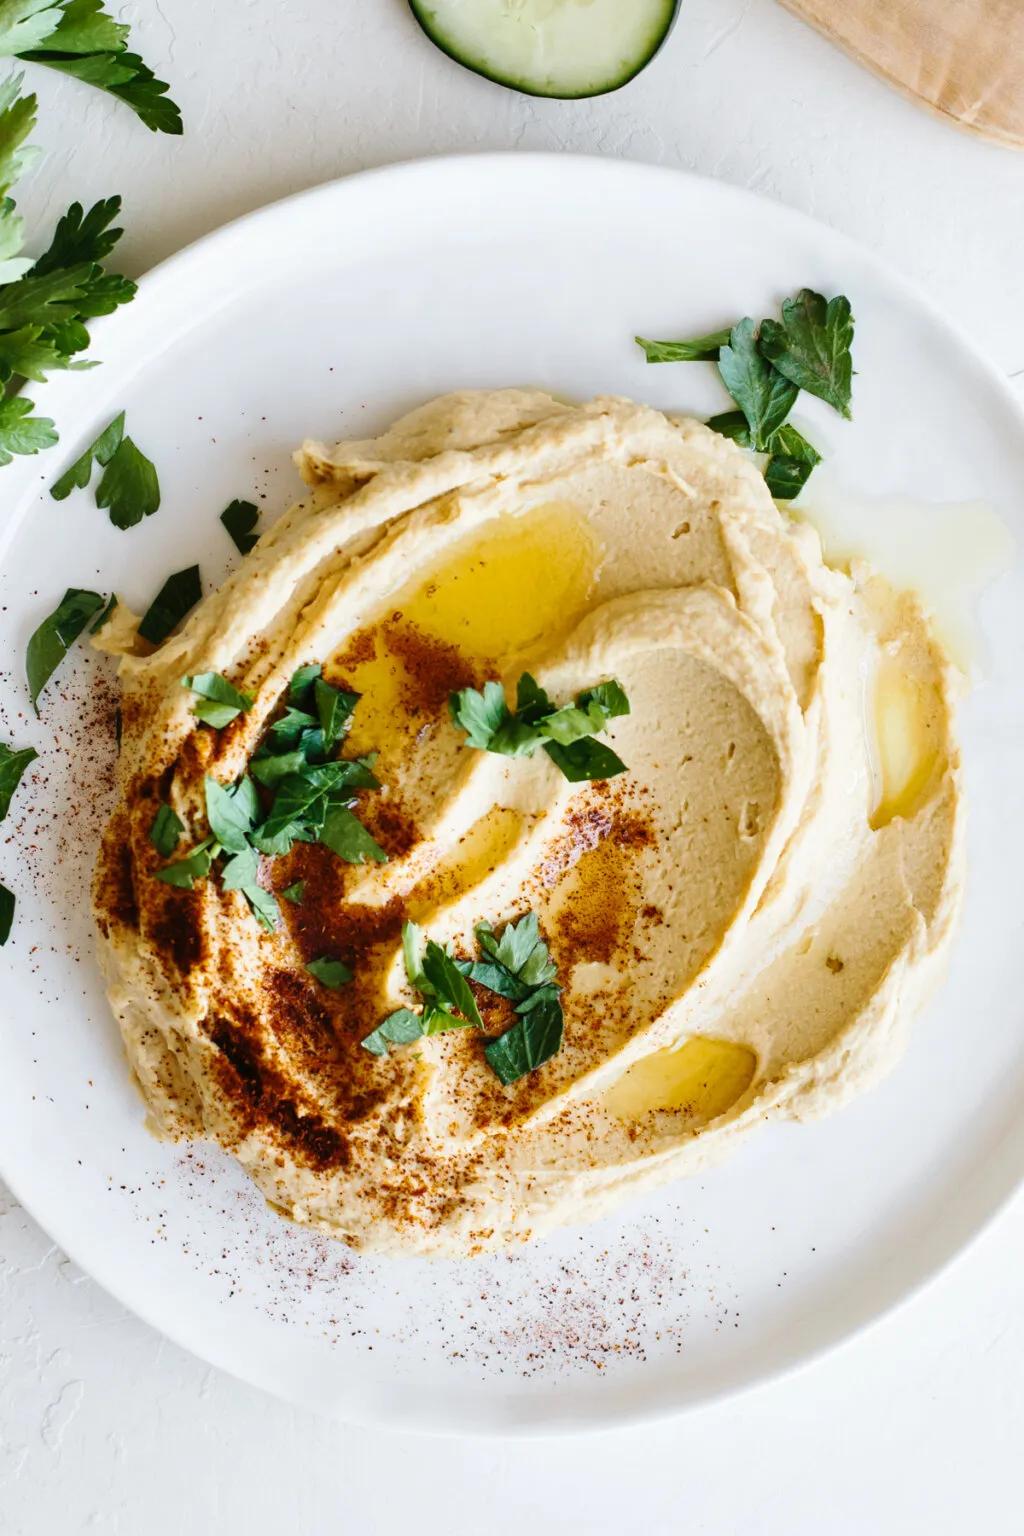 The BEST Hummus Recipe - How to Make Hummus in 3 Minutes! | Downshiftology